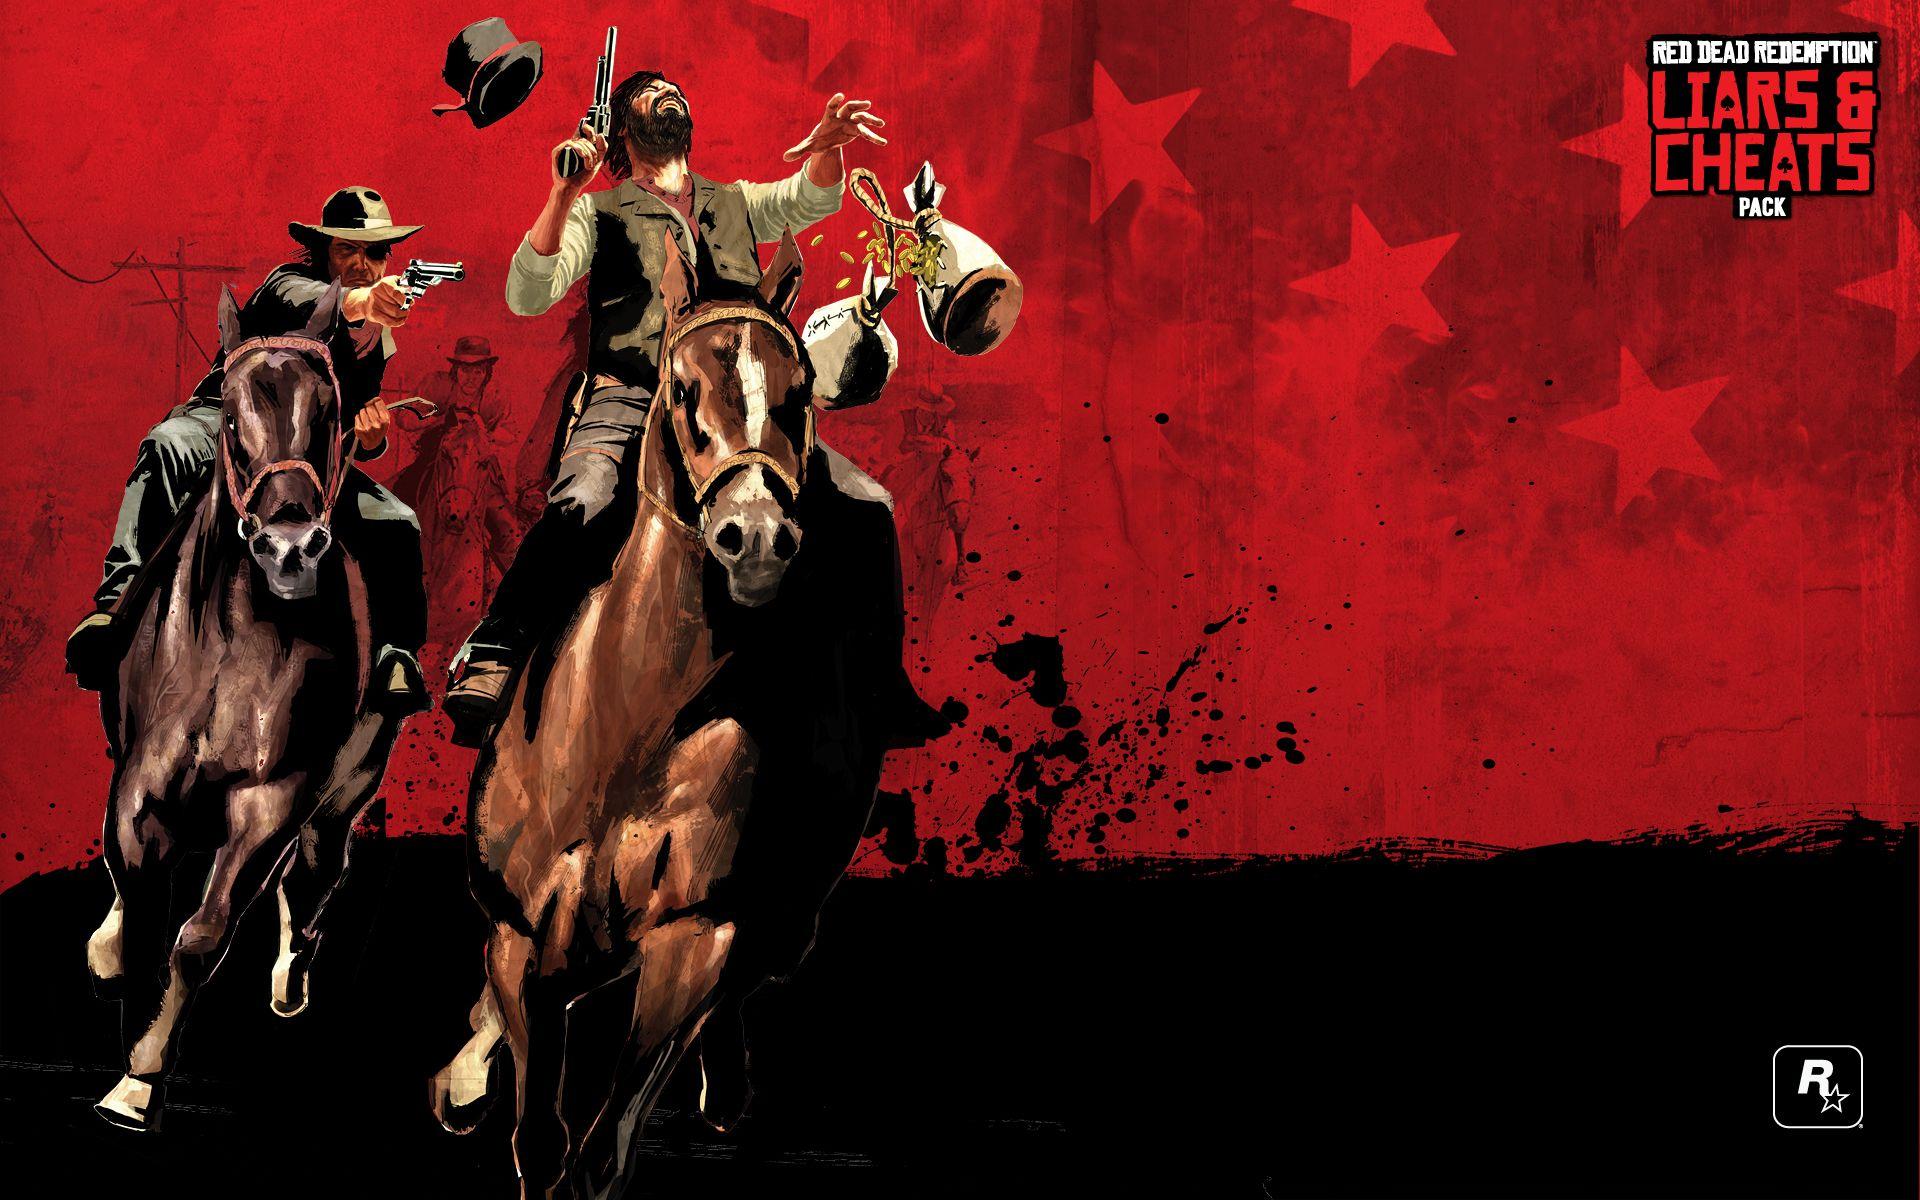 Red Dead Redemption: Undead Nightmare 3. Red dead